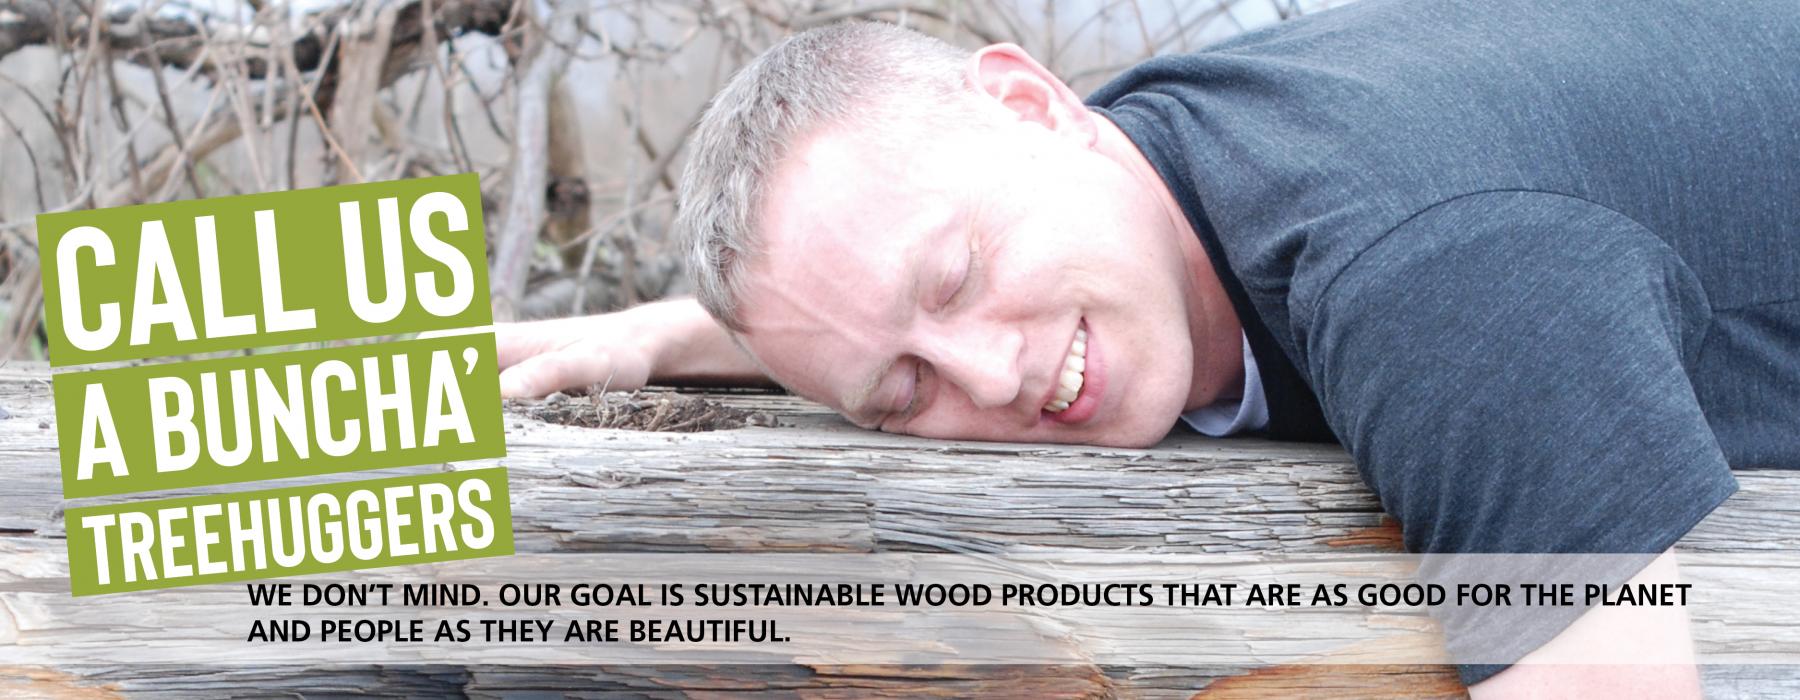 Pioneer Millworks Reclaimed and Sustainable Wood Products Ethically and Sustainably Sourced